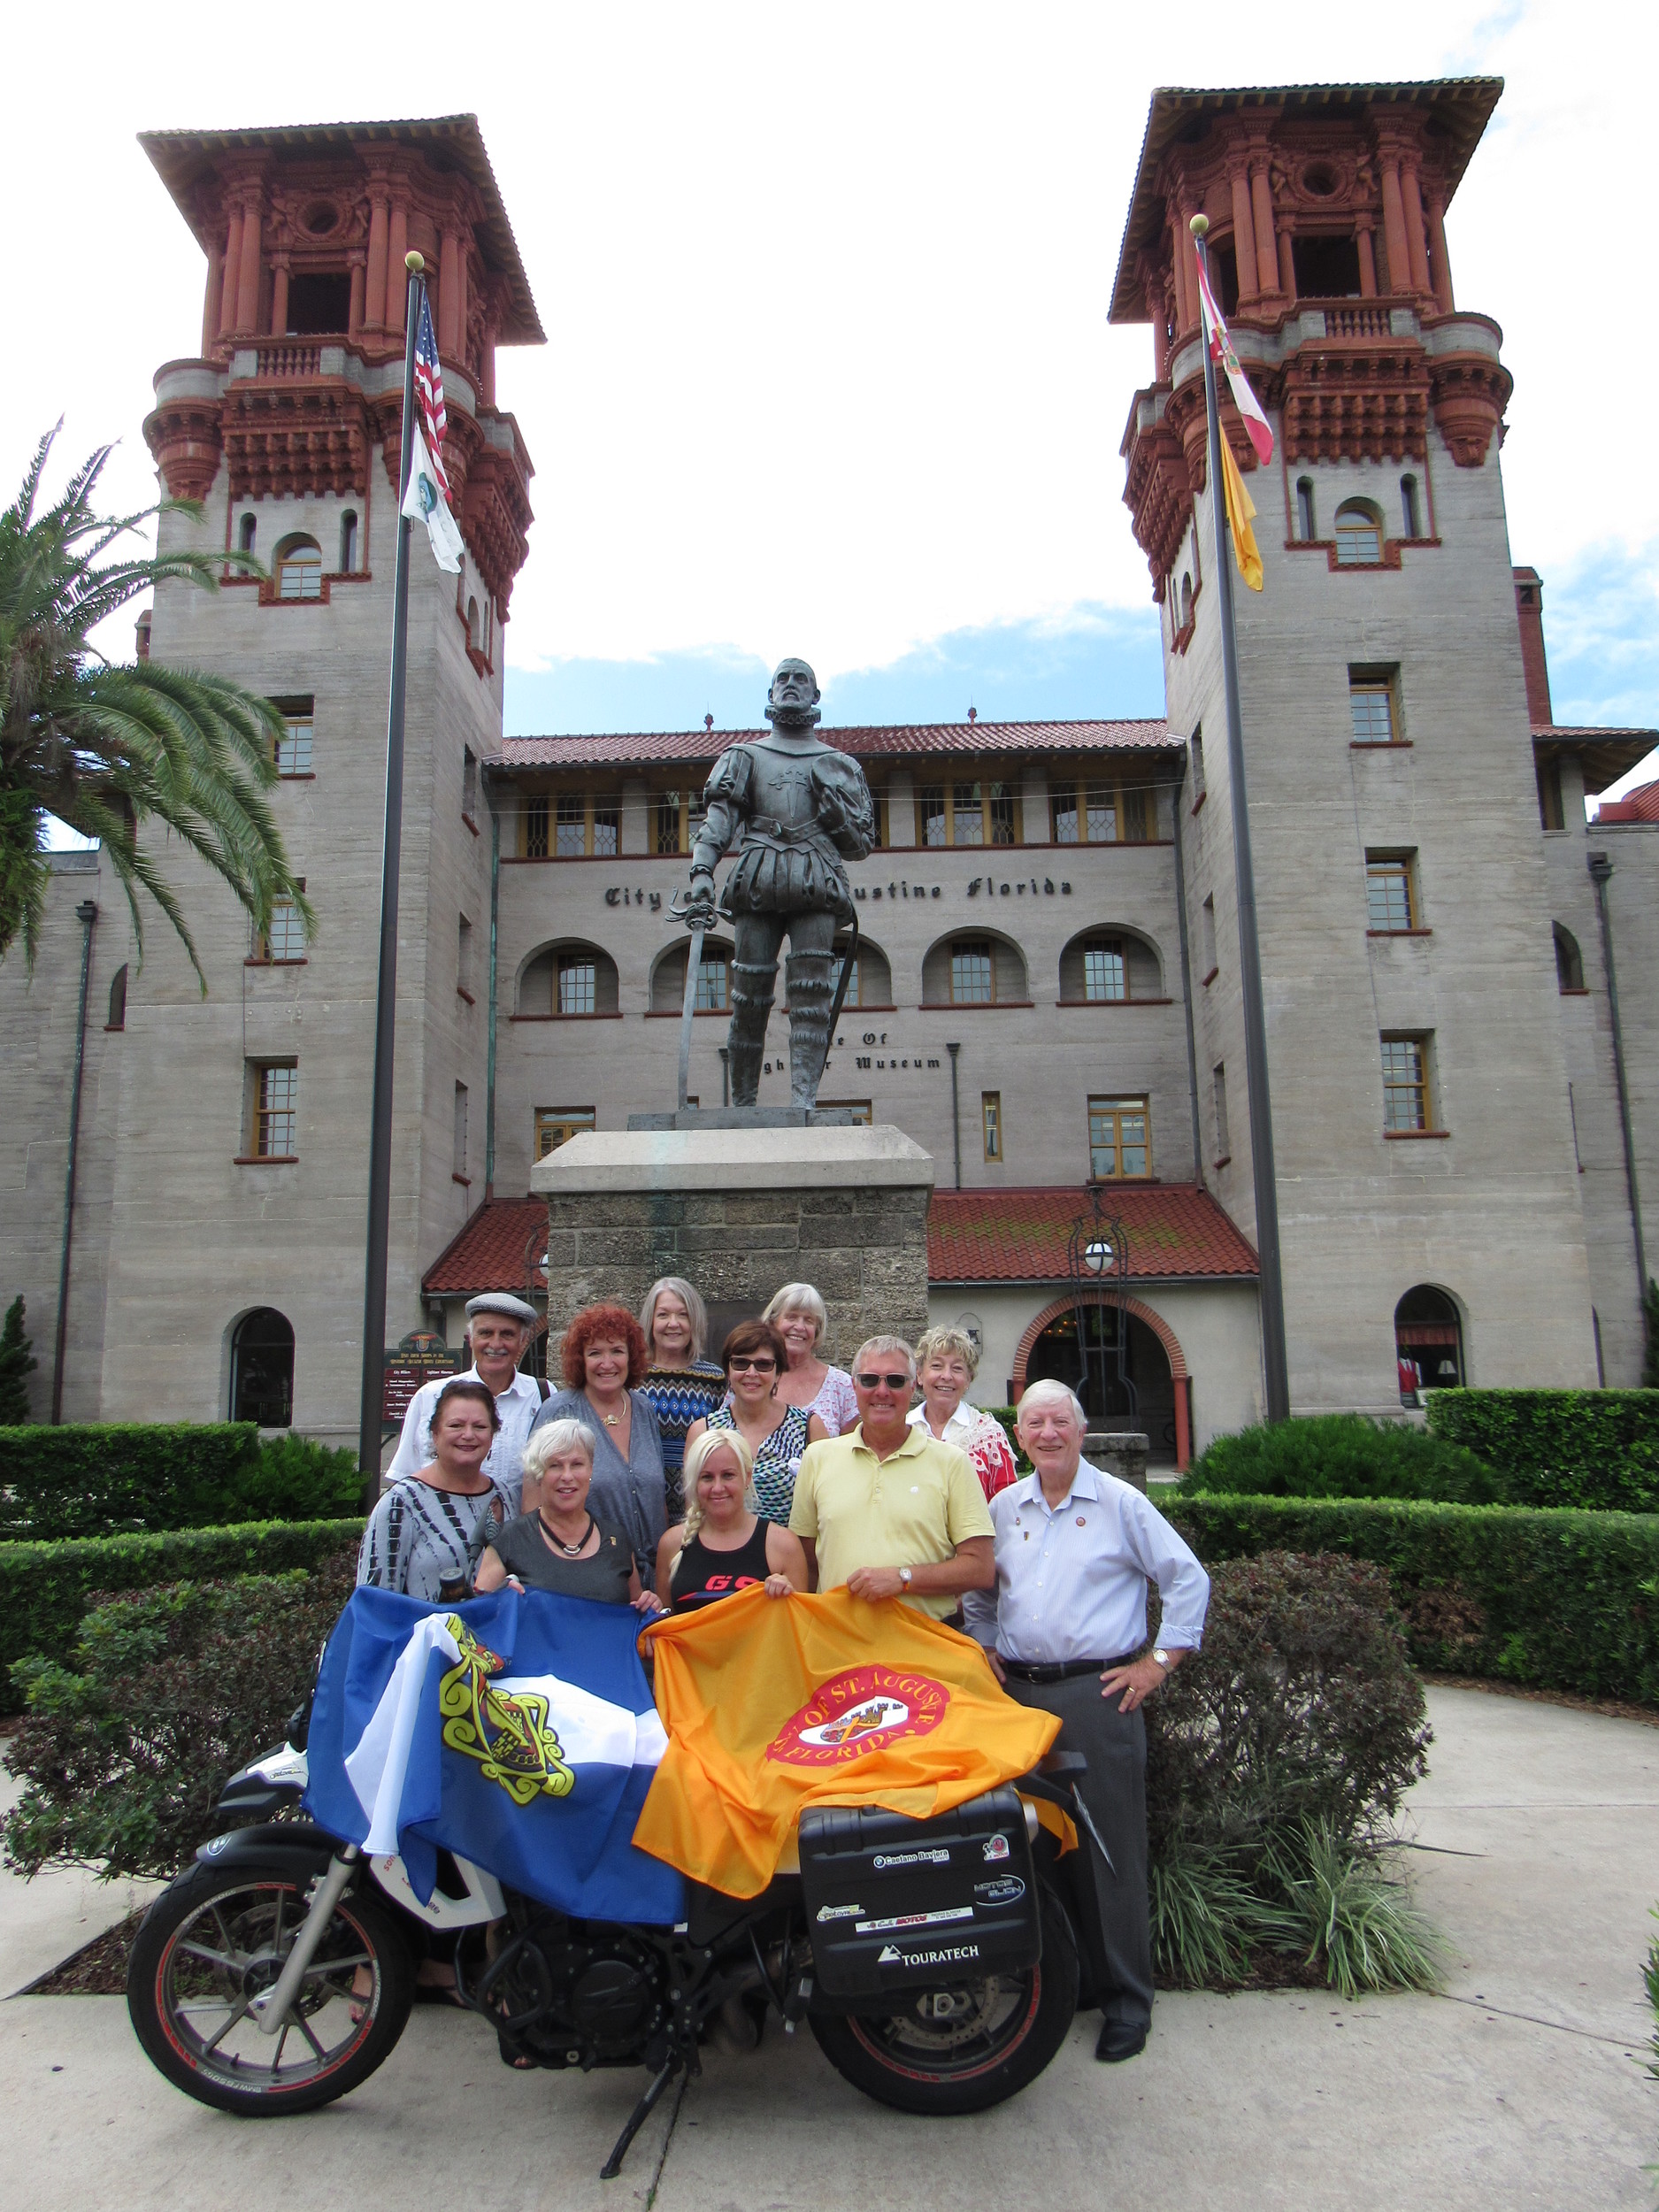 St. Augustine Mayor Nancy Shaver (left) and Sonia Barbosa of Aviles, Spain (right) pose with members of the flag commission.